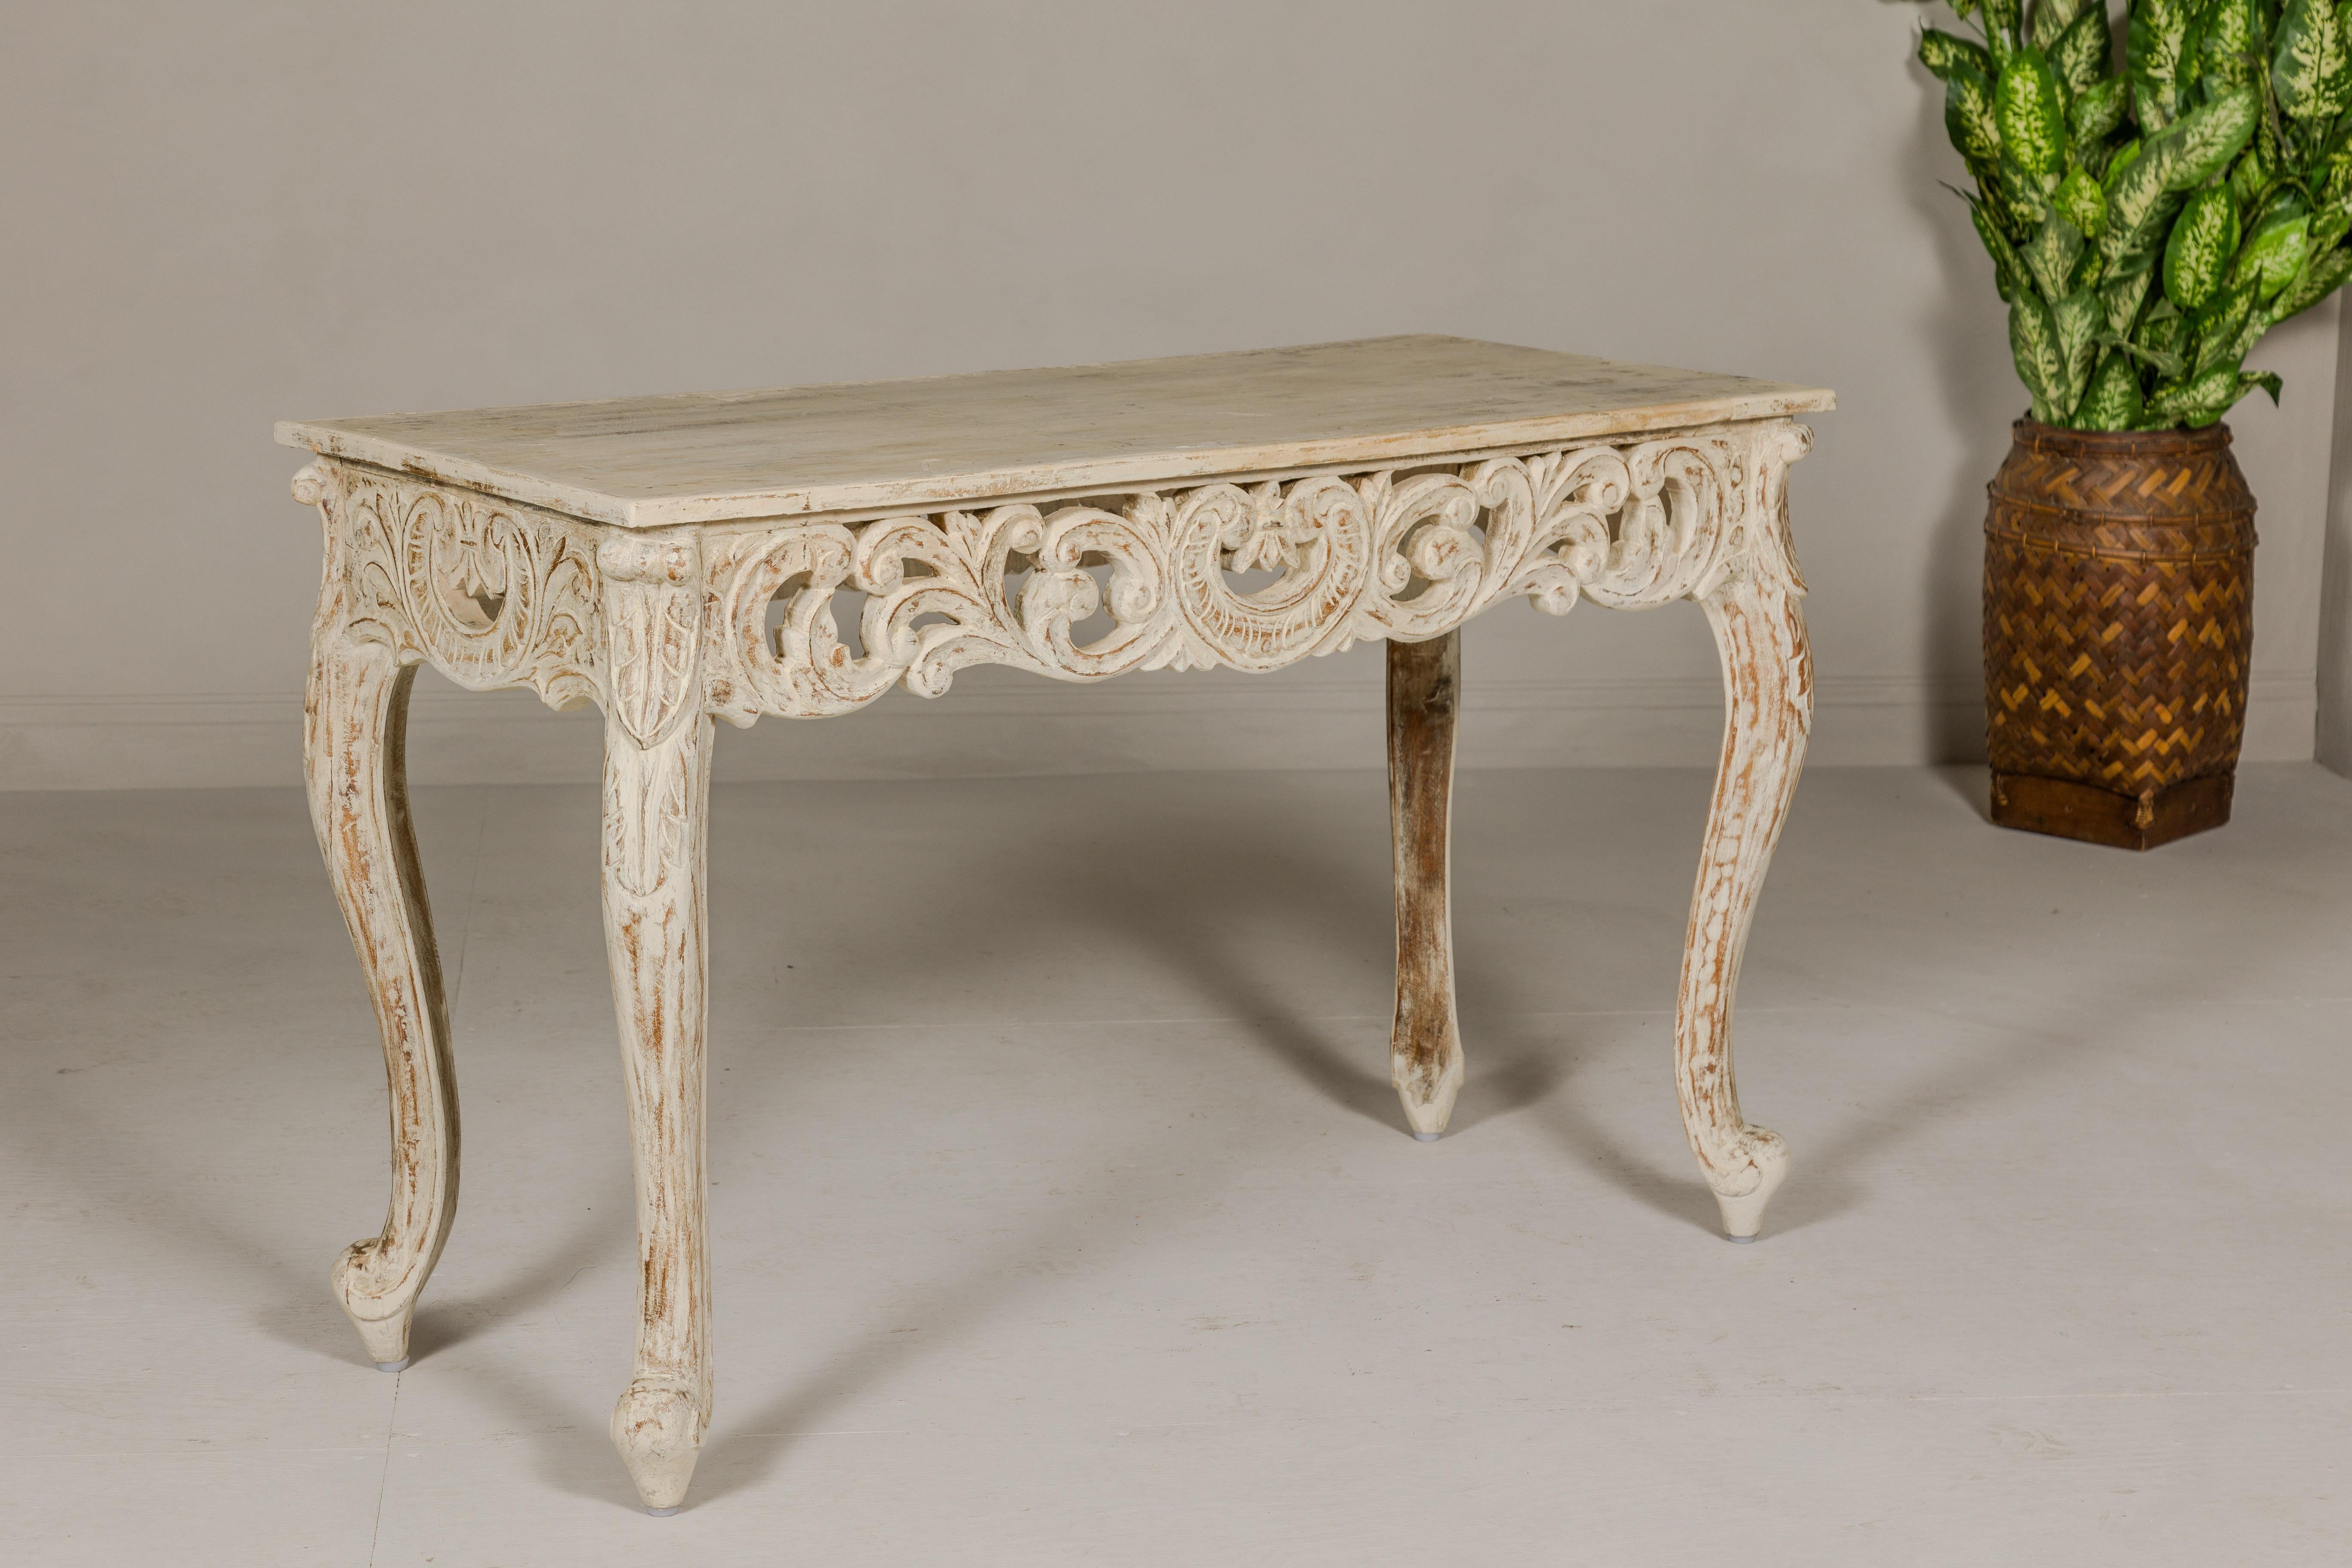 Rococo Style Painted Console Table with Carved Apron and Distressed Finish For Sale 9